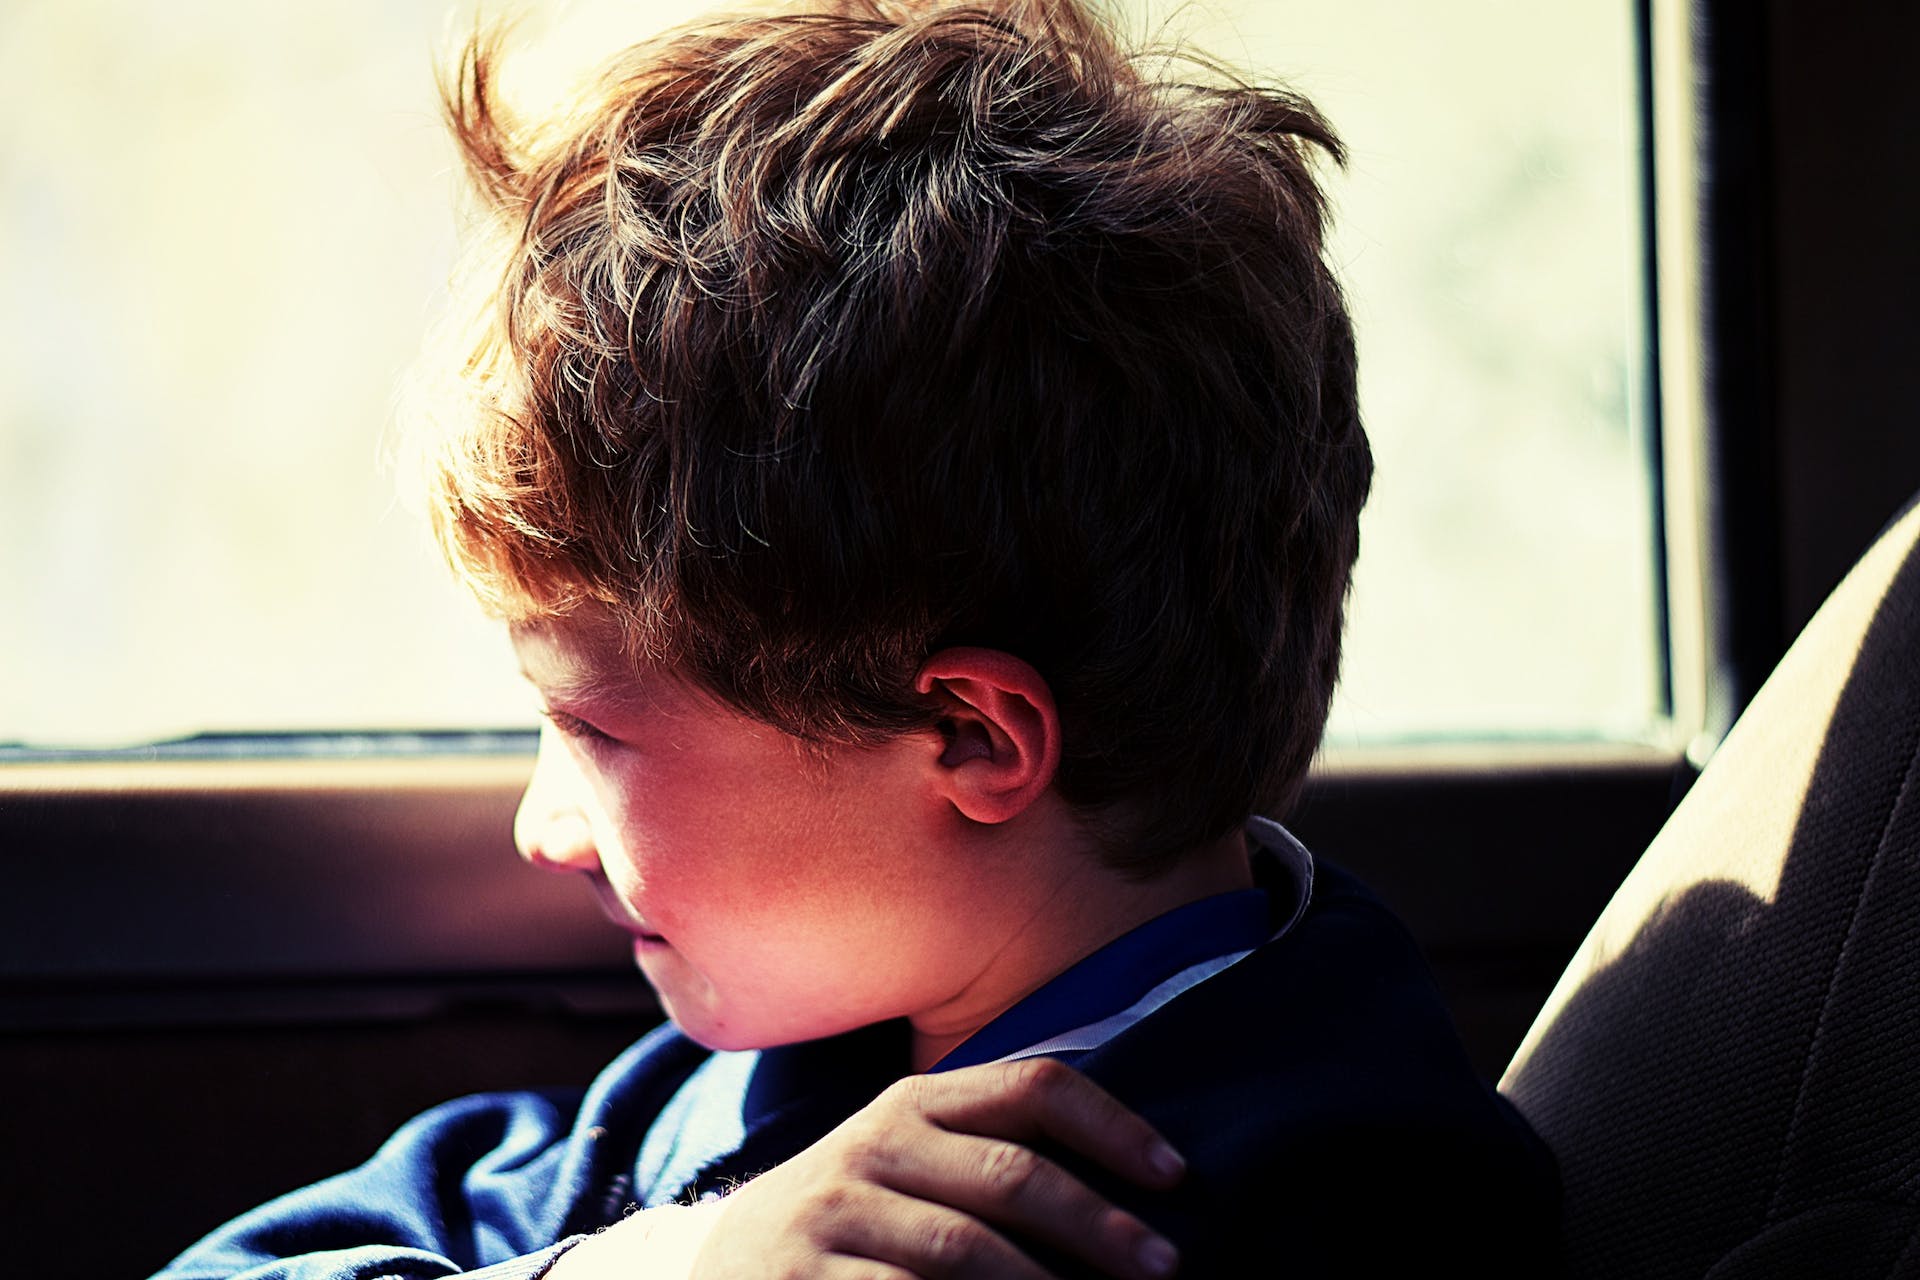 A young boy sitting in a vehicle | Source: Pexels